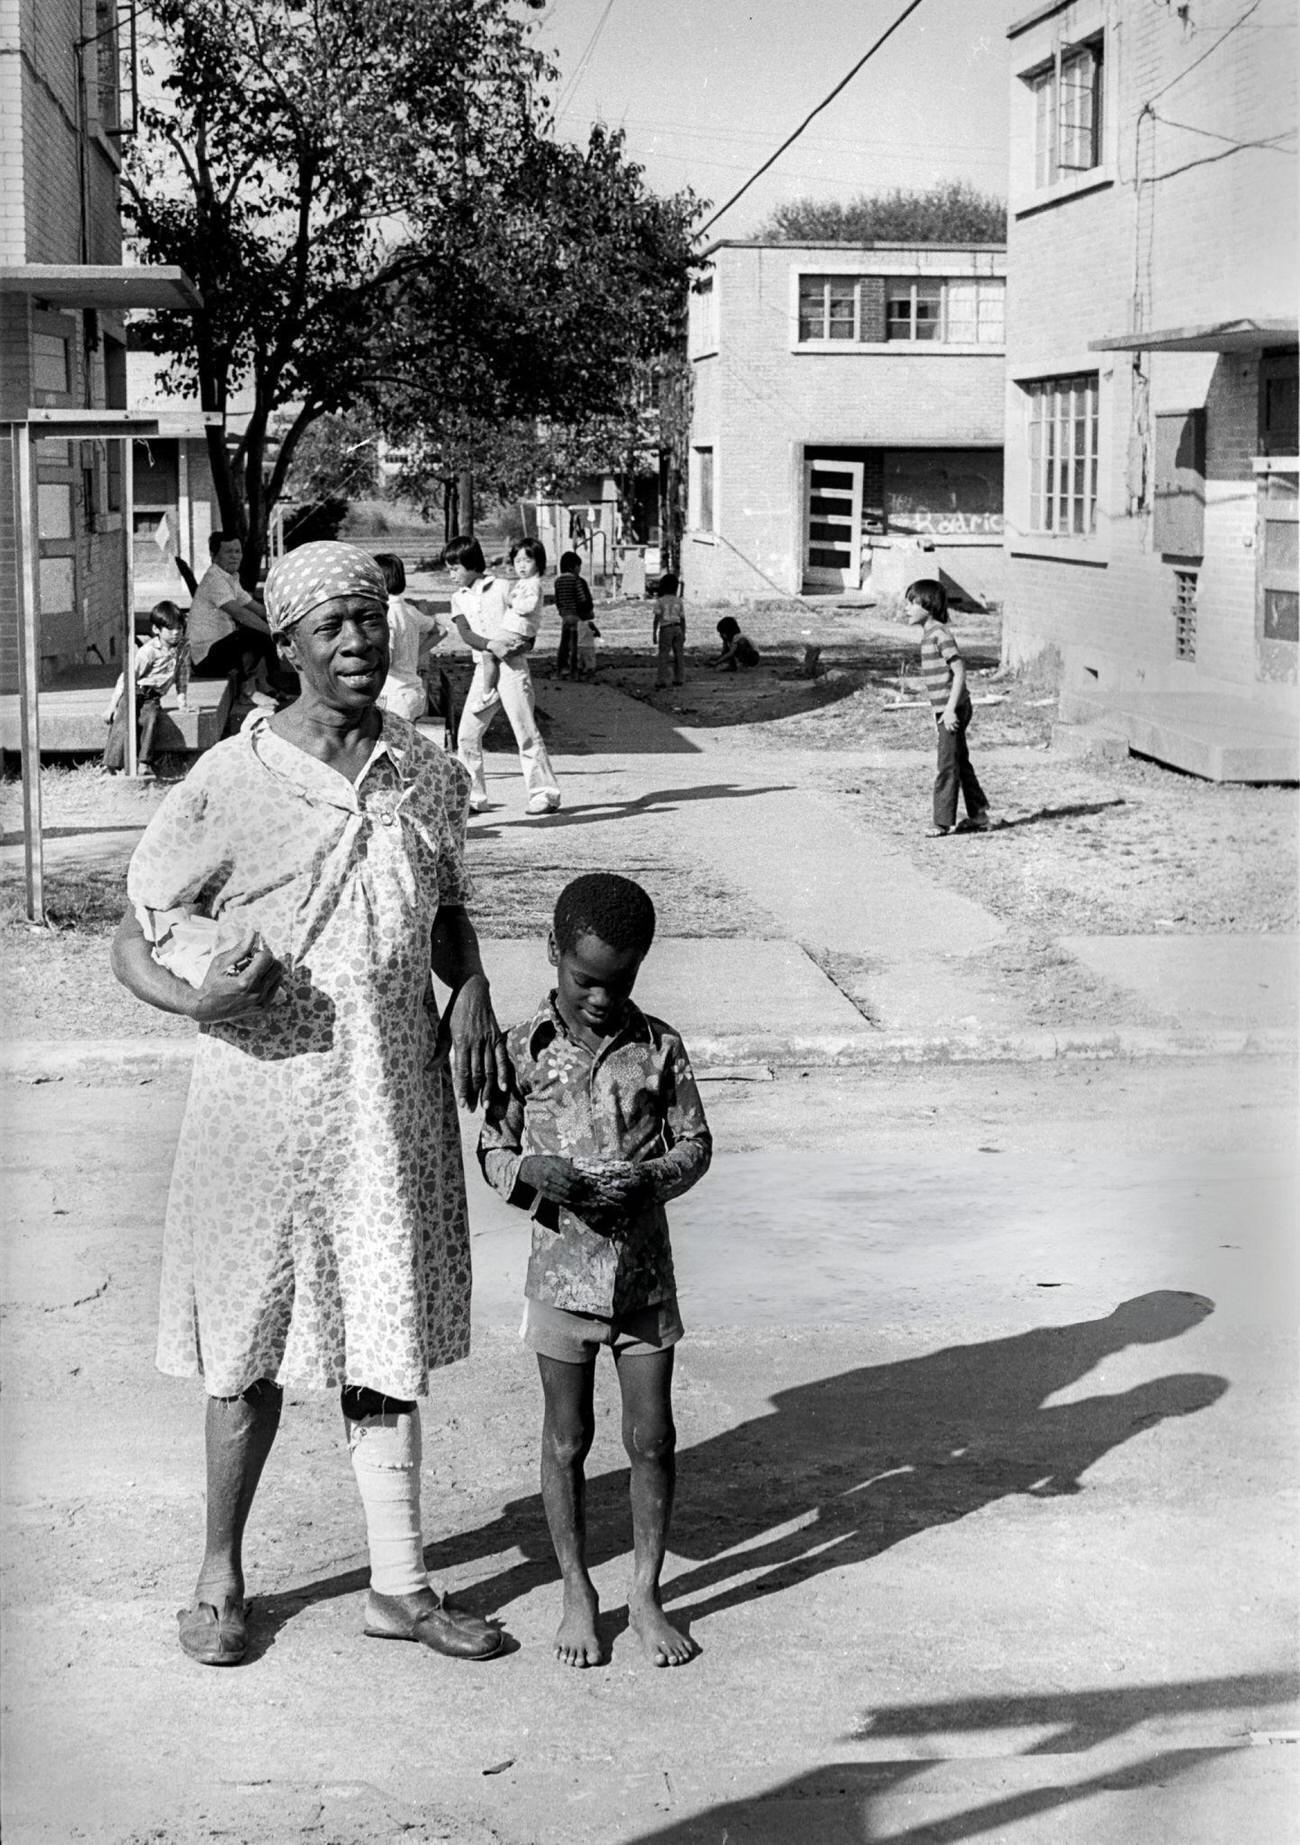 A grandmother and her grandson crossing a street, Houston, Texas, 1983.